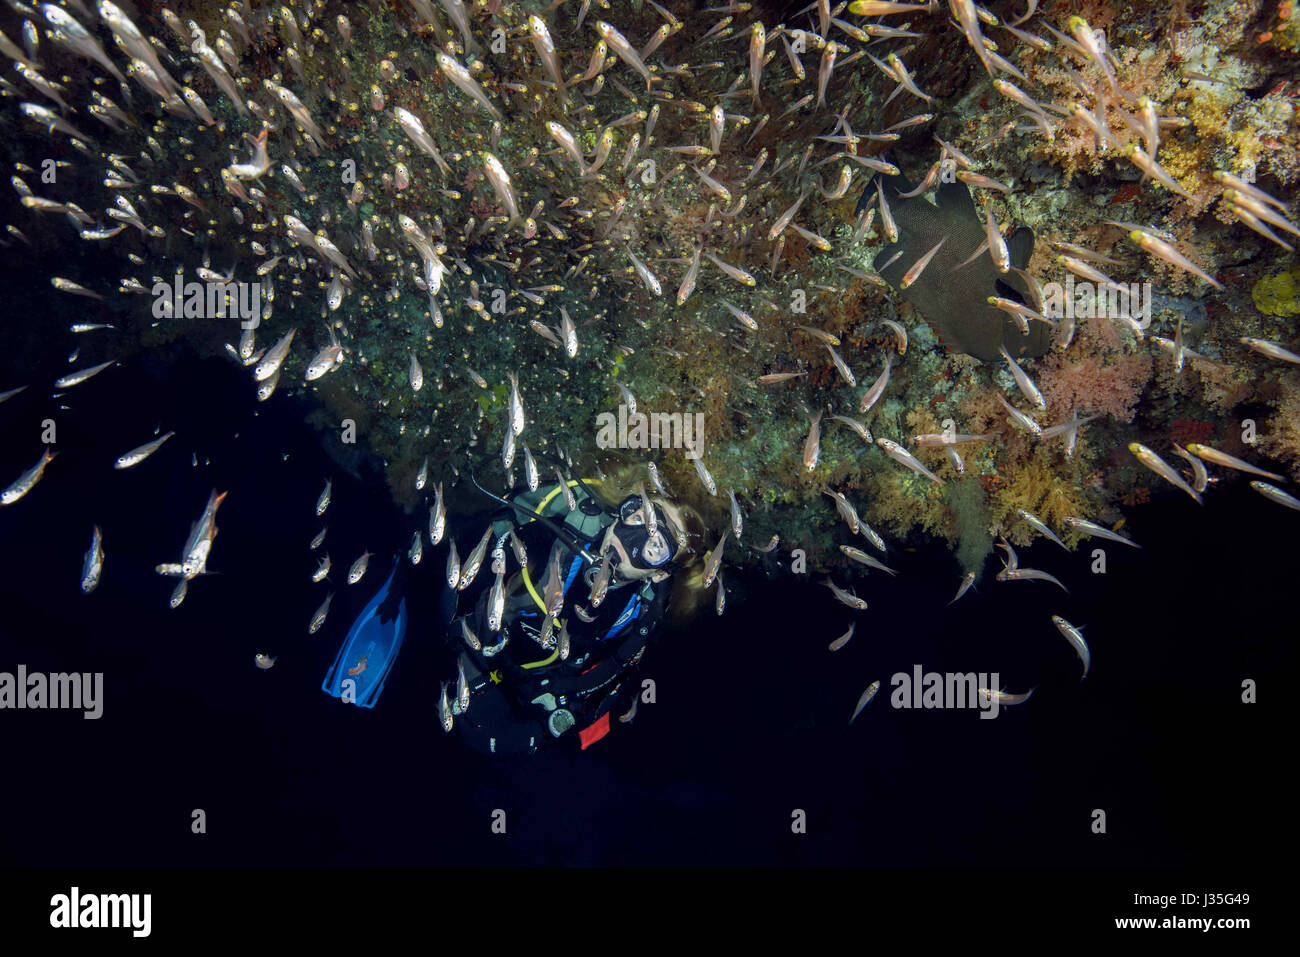 Indian Ocean, Maldives. 21st Mar, 2017. Female scuba diver and school of fish Pigmy Sweeper (Pempherichthys guentheri) in the night, Indian Ocean, Maldives Credit: Andrey Nekrasov/ZUMA Wire/ZUMAPRESS.com/Alamy Live News Stock Photo